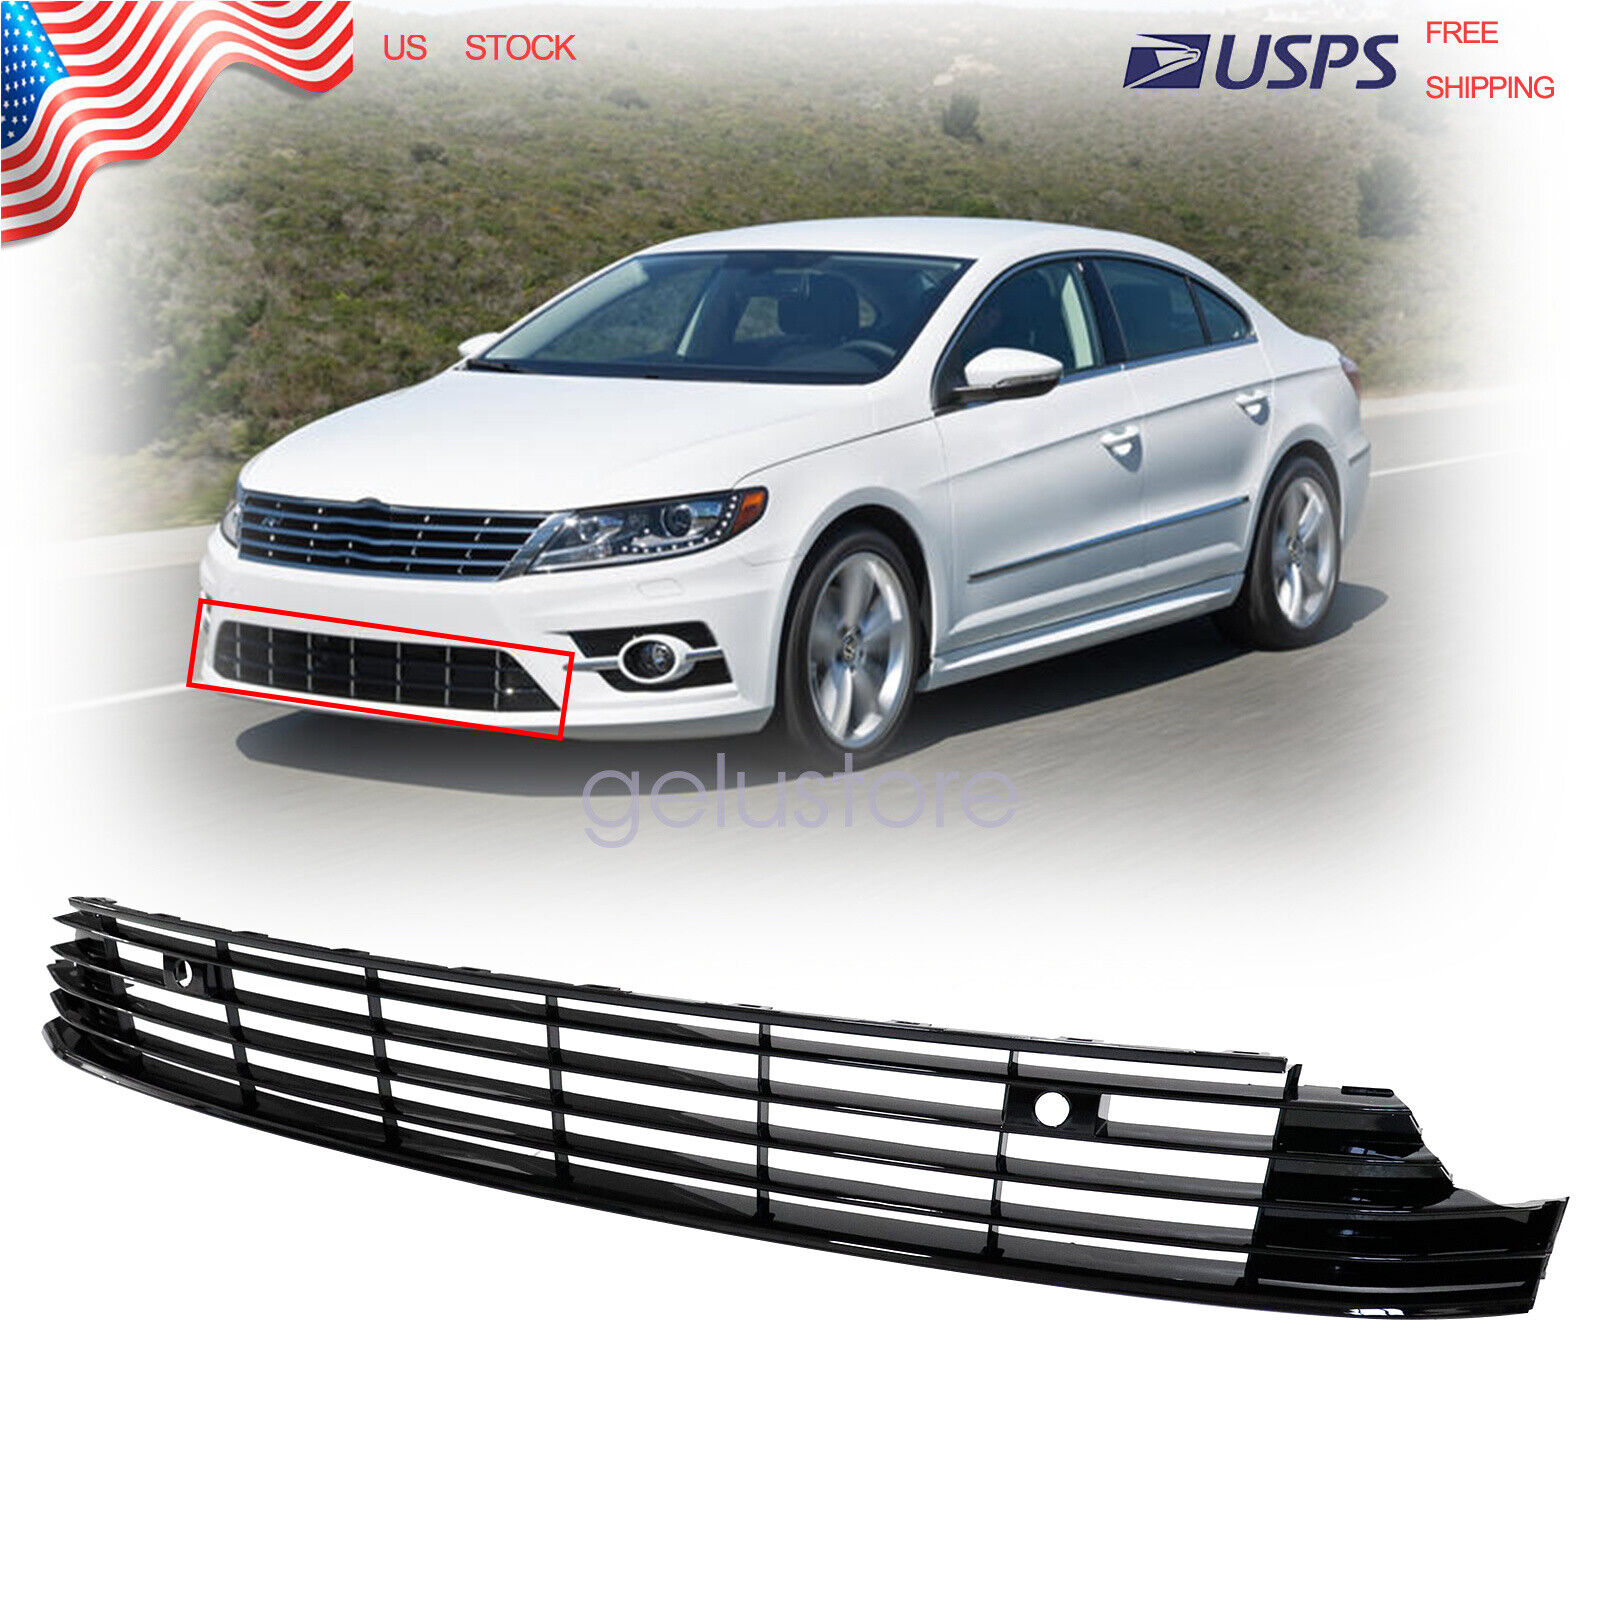 New For Volkswagen CC 2013-2017 Bumper Lower Grille Assembly VW1036131